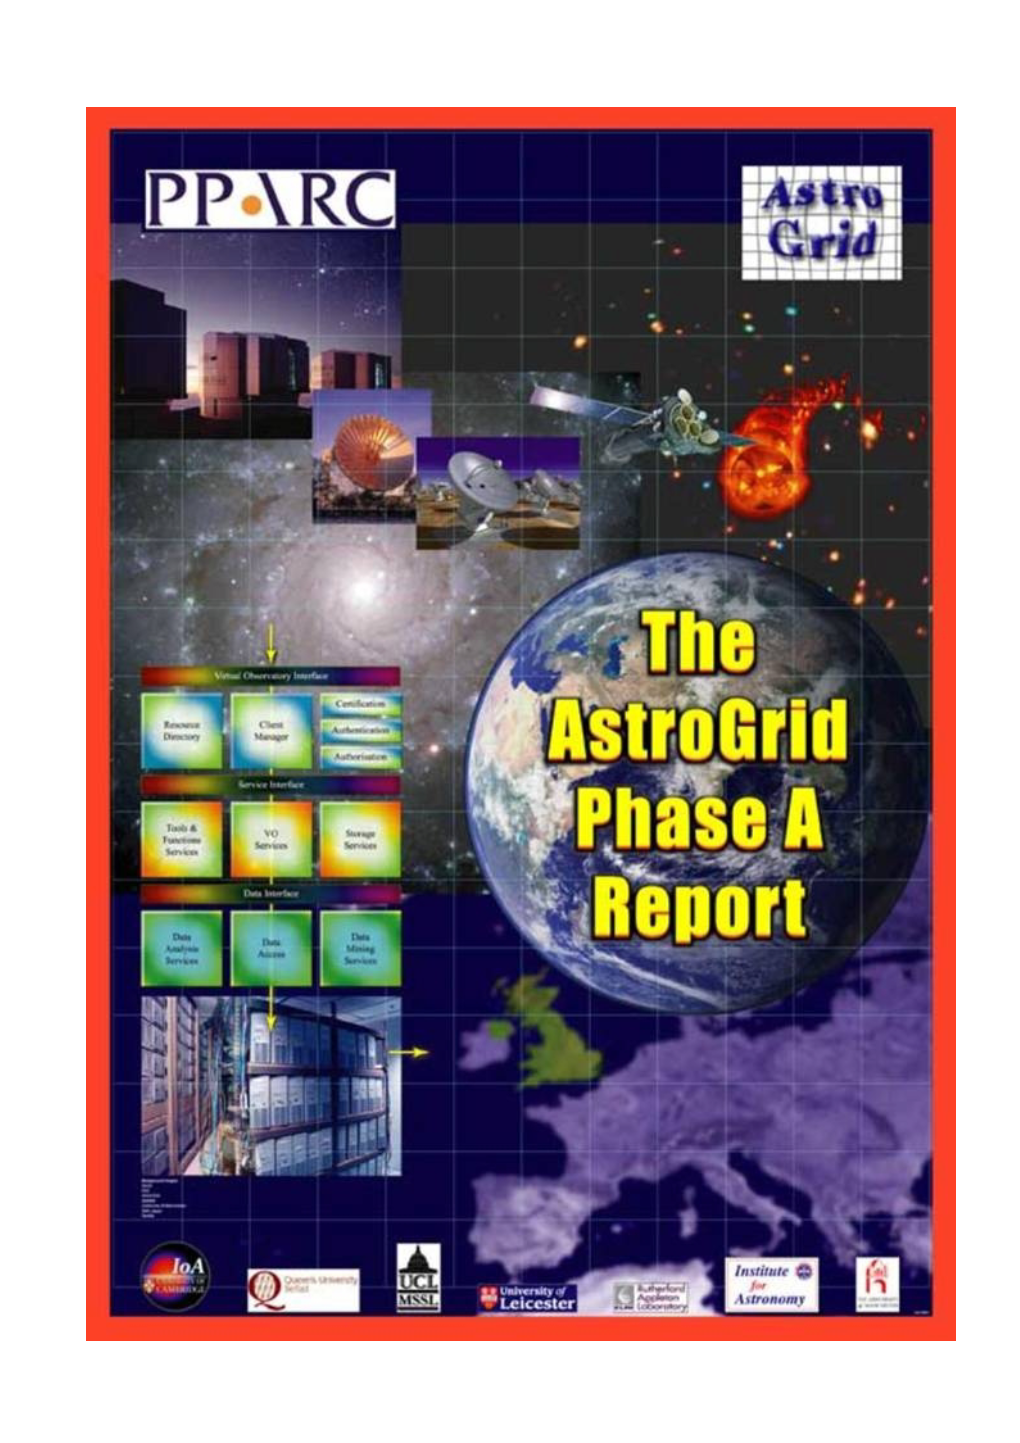 Astrogrid Phase a Report